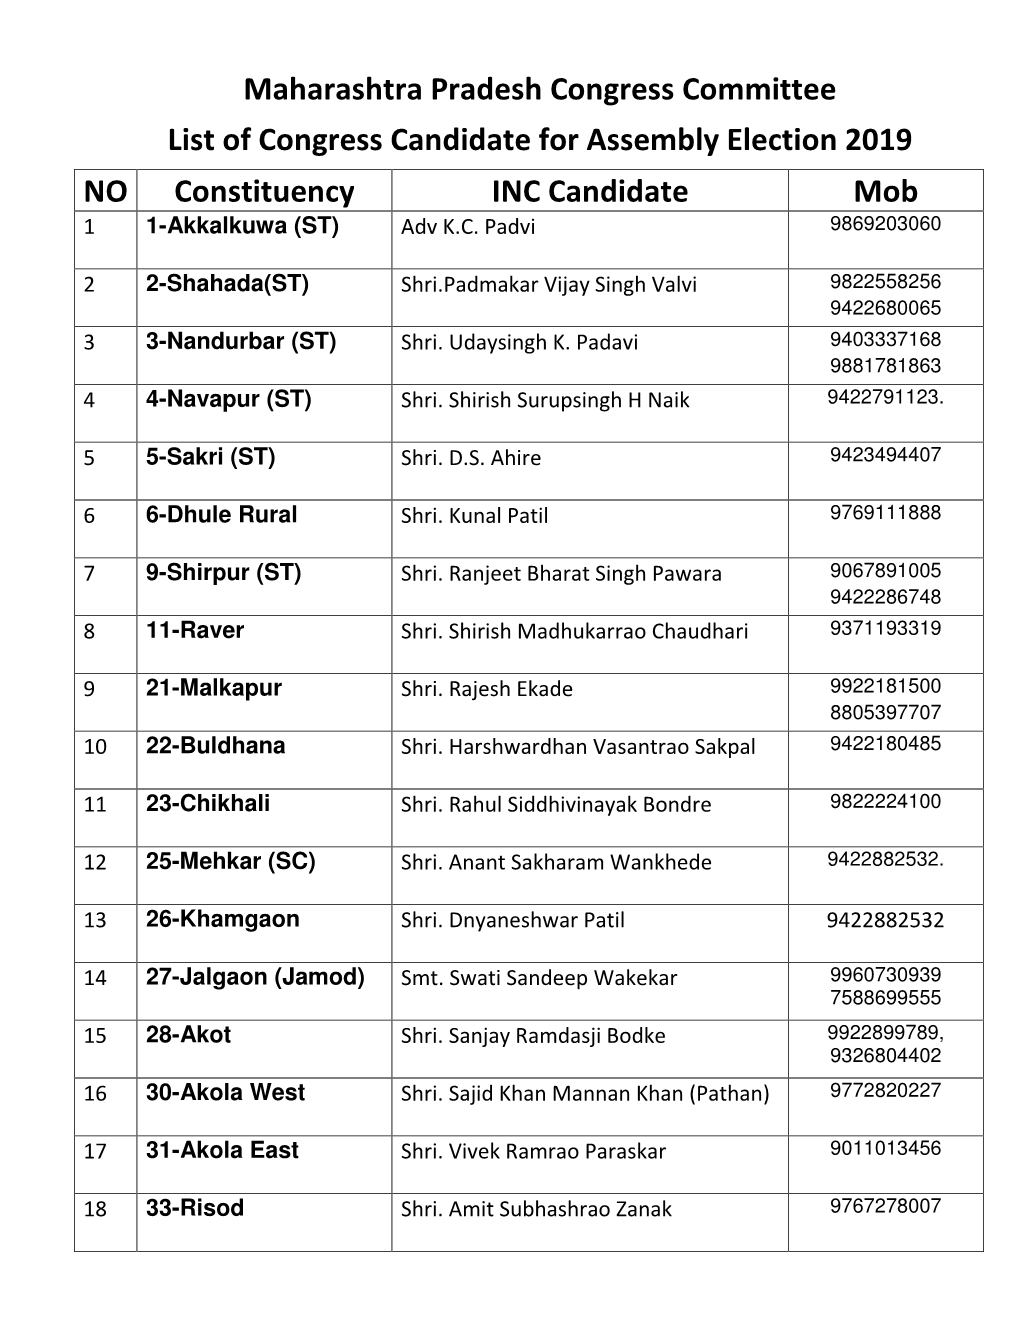 Final List of Congress Candidate 2019 Name